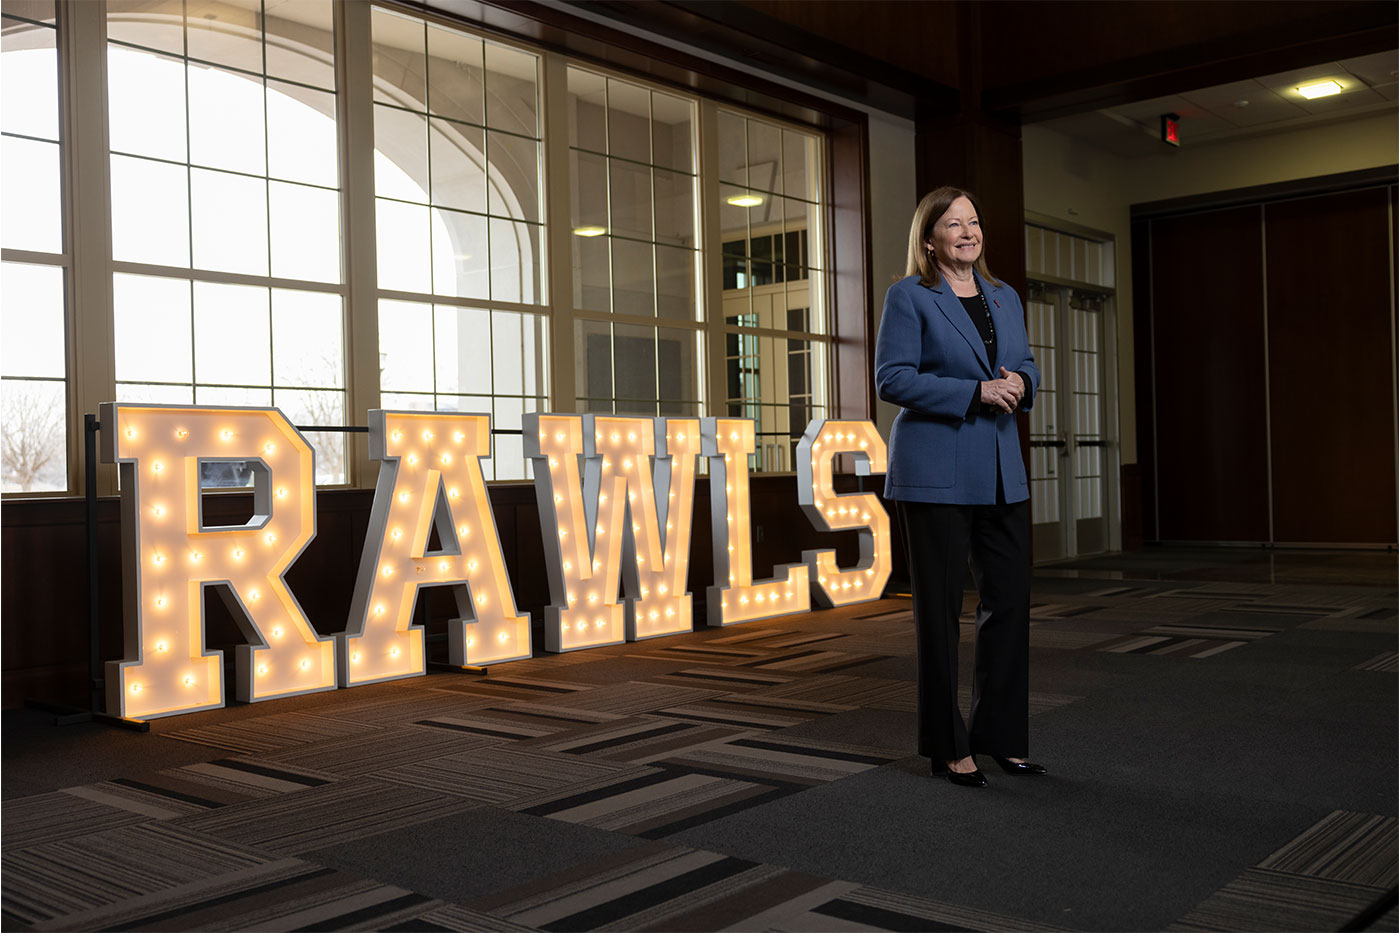 Margaret standing in front of a lit "Rawls" sign.